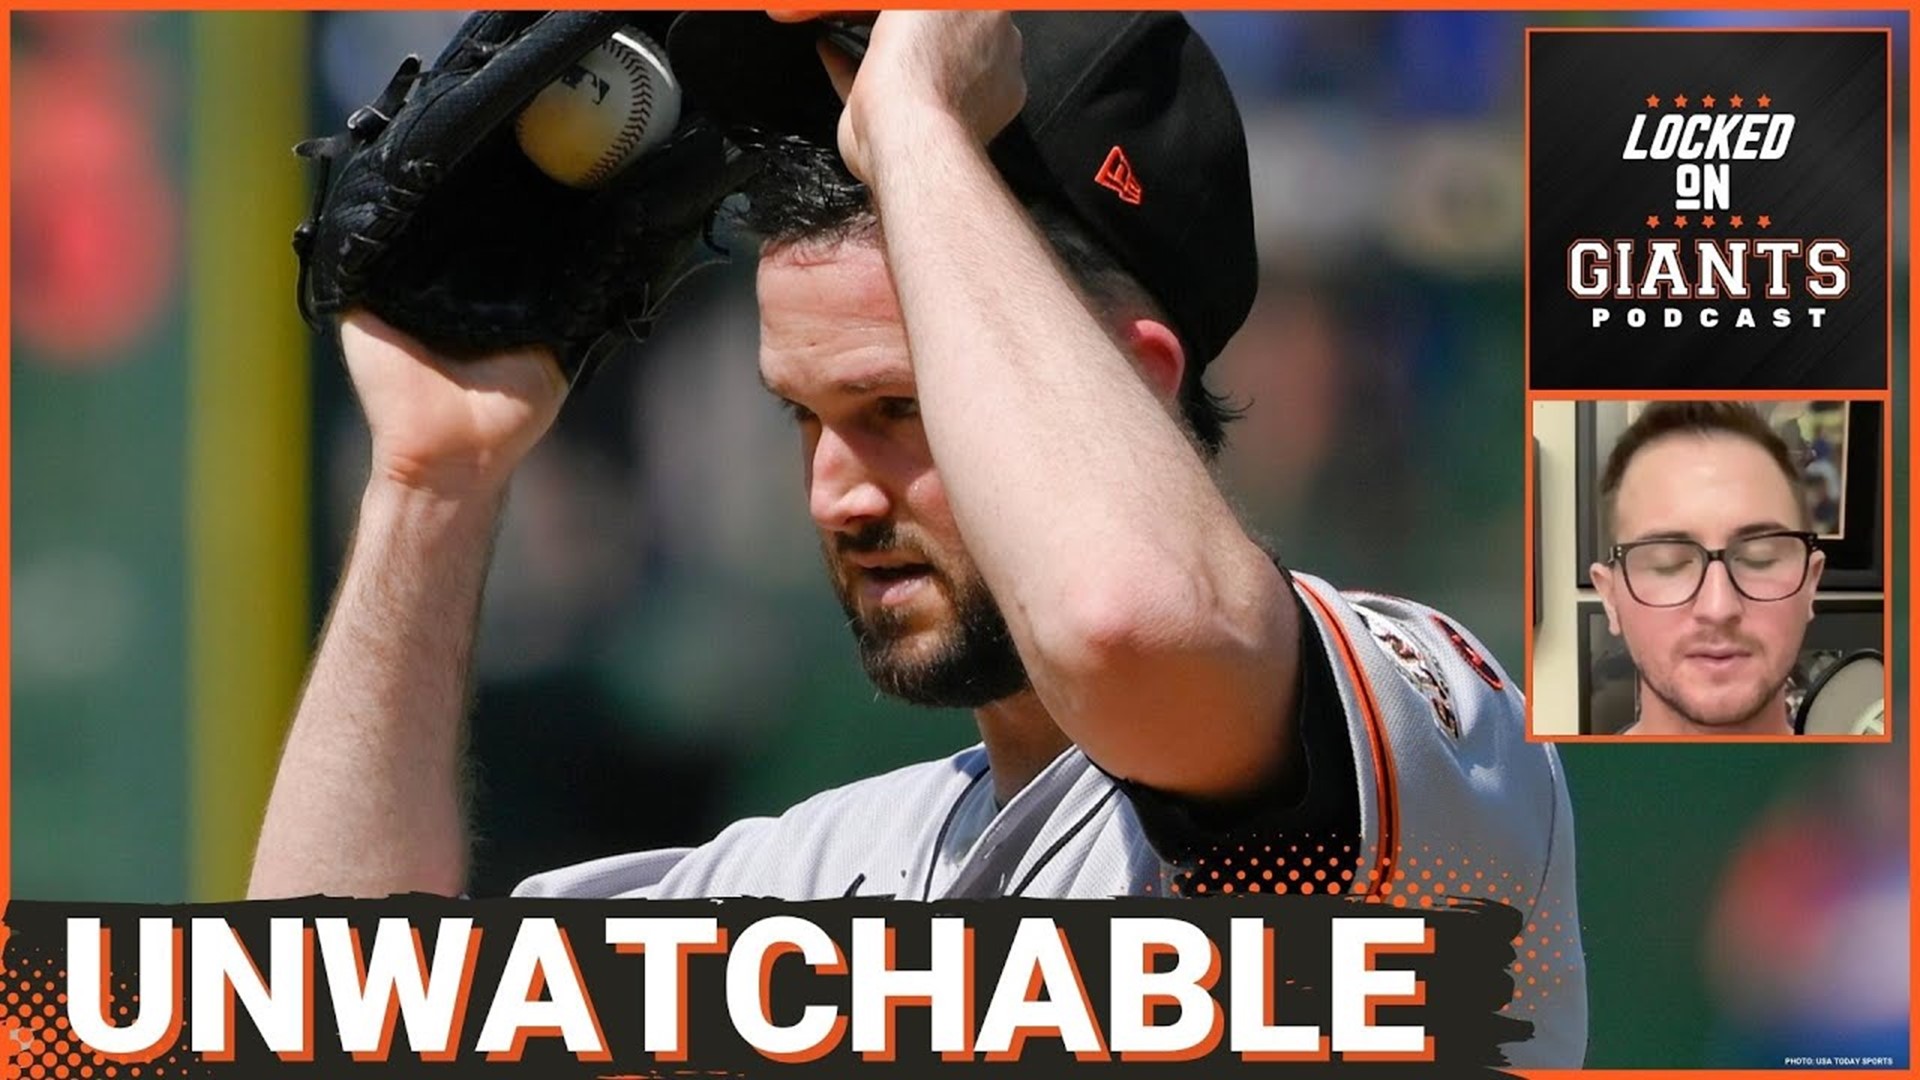 Down & disgusted but not yet defeated. SF Giants' wild card hopes live on